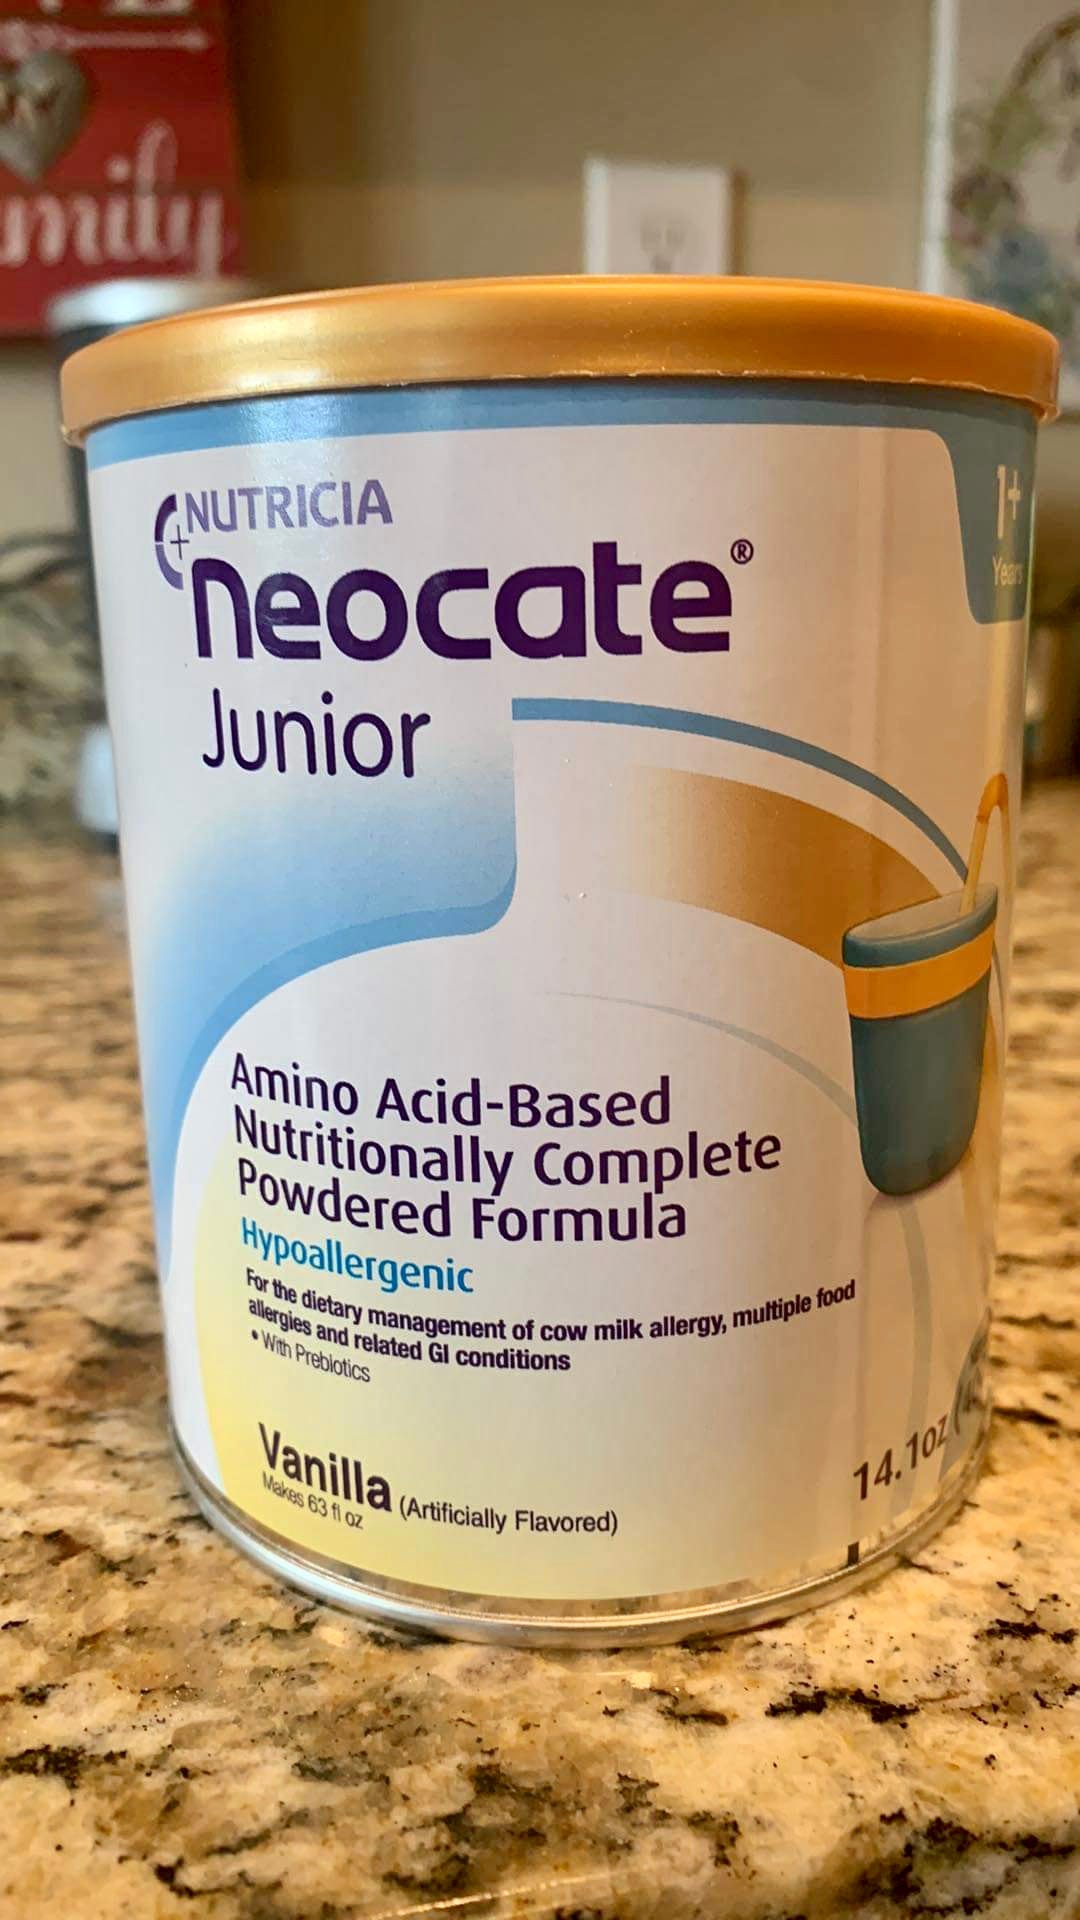 A white can of Neocate Junior sits on a marbled countertop.